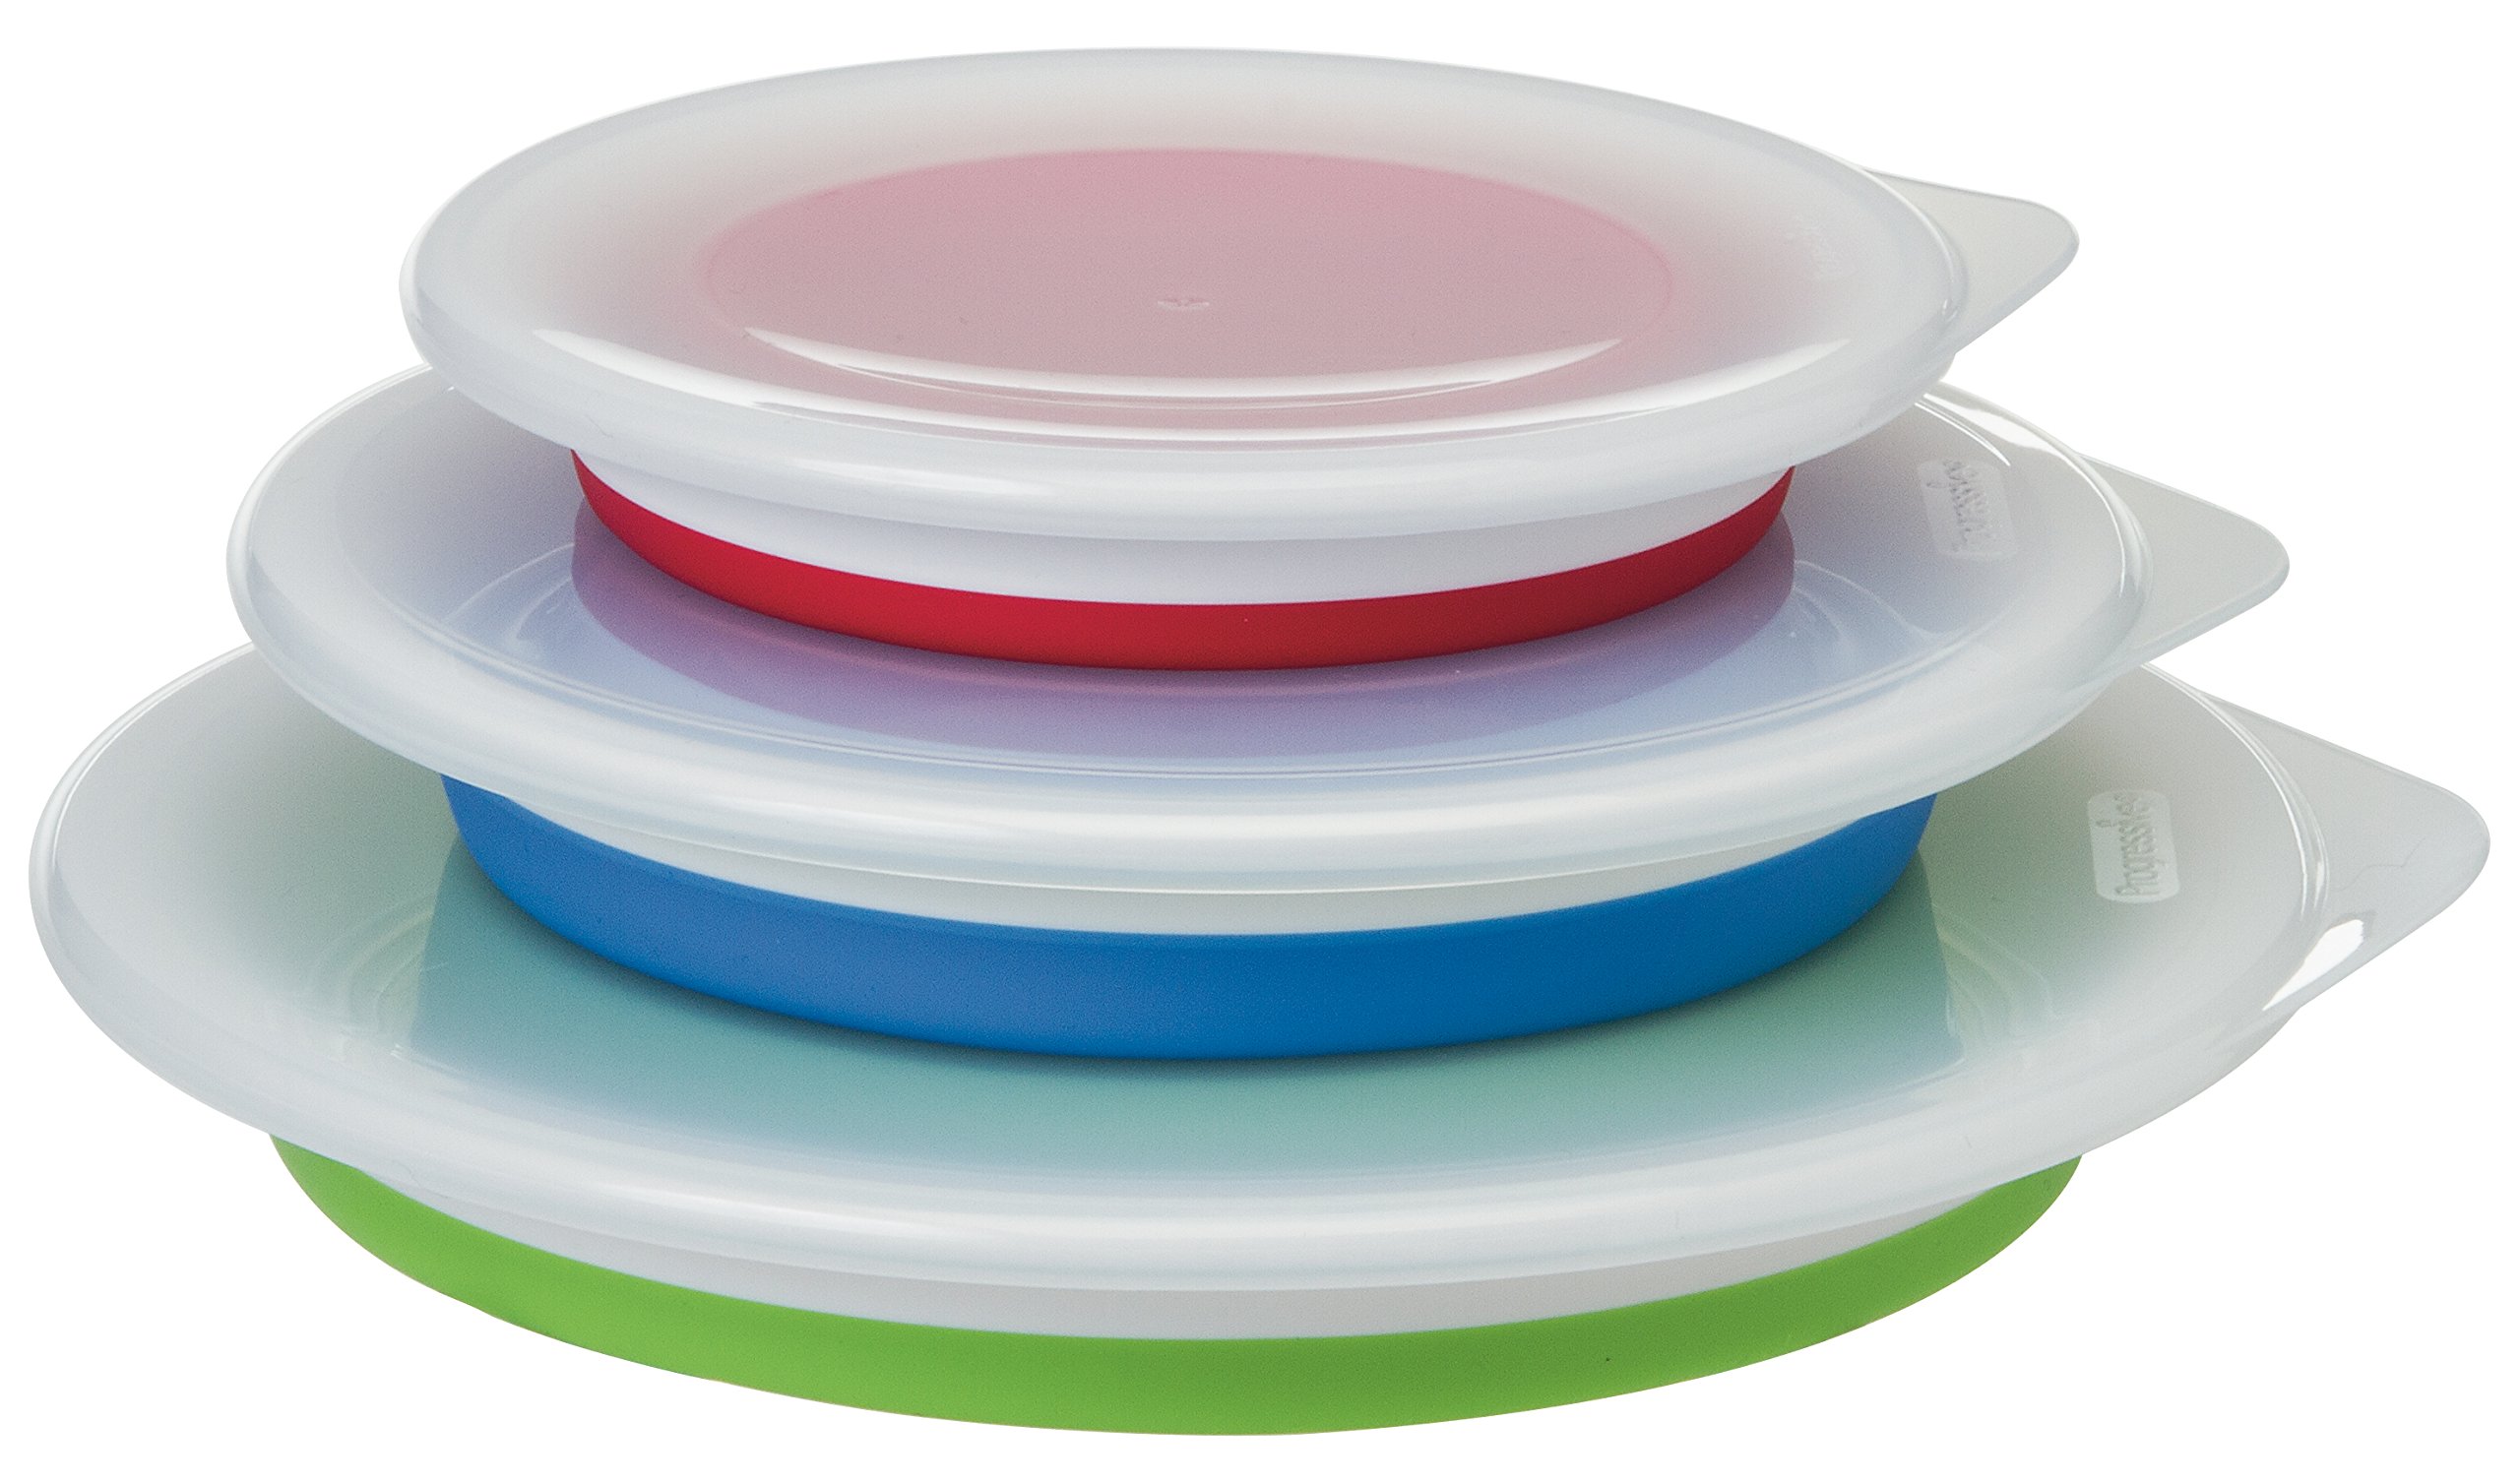 Progressive Prepworks Thinstore Collapsible Prep/Storage Bowls with Lids - Set of 3,Multicolored